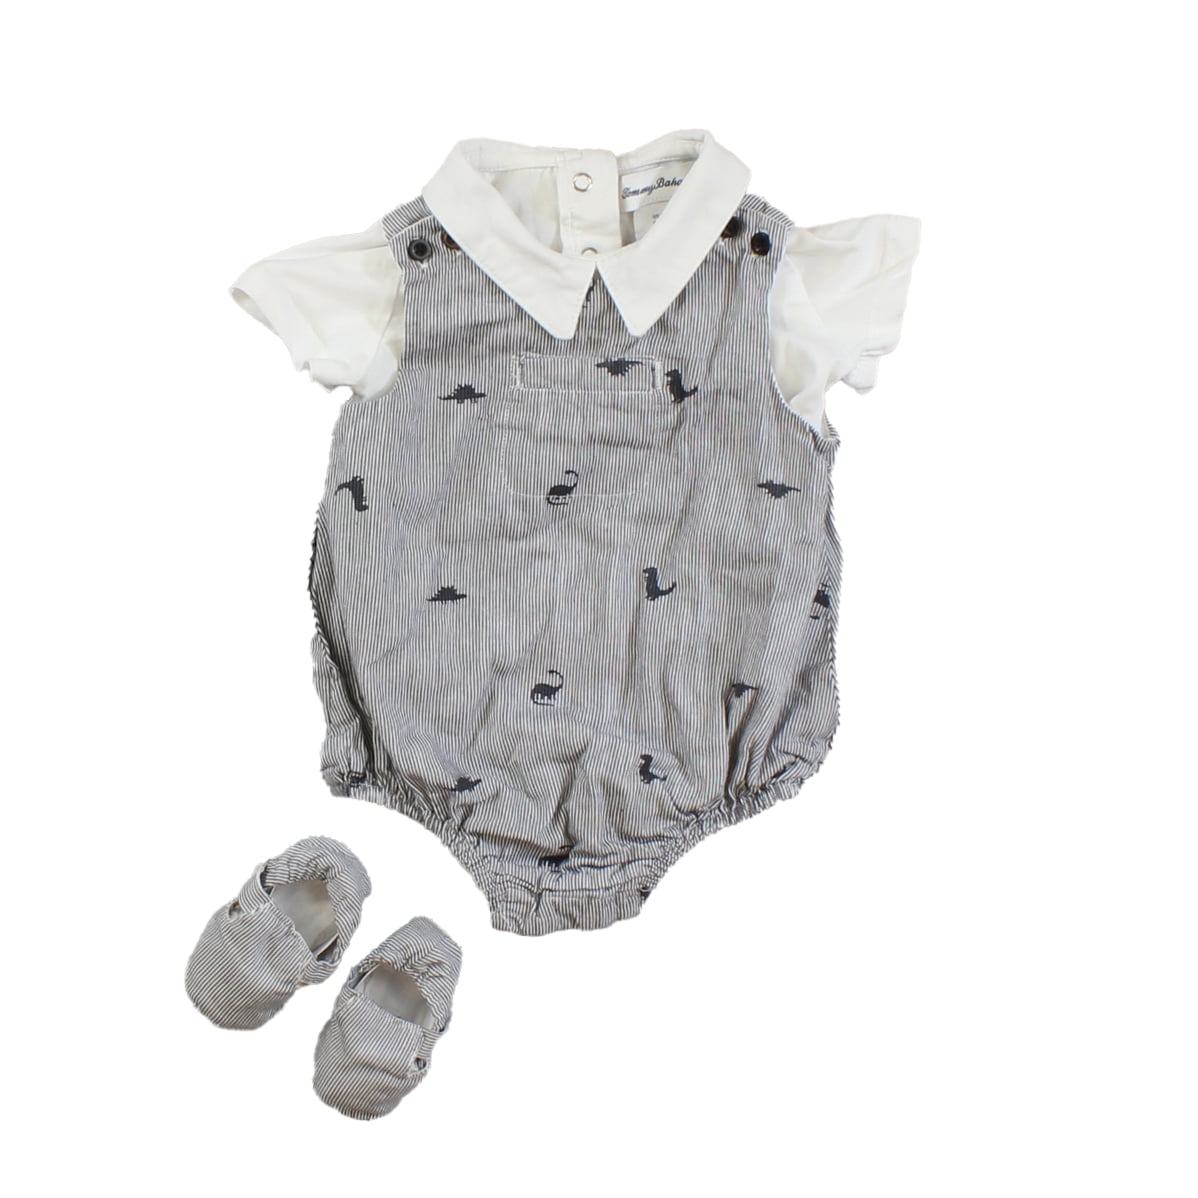 2-pieces Apparel Sets size: 18-24 Months - The Swoondle Society